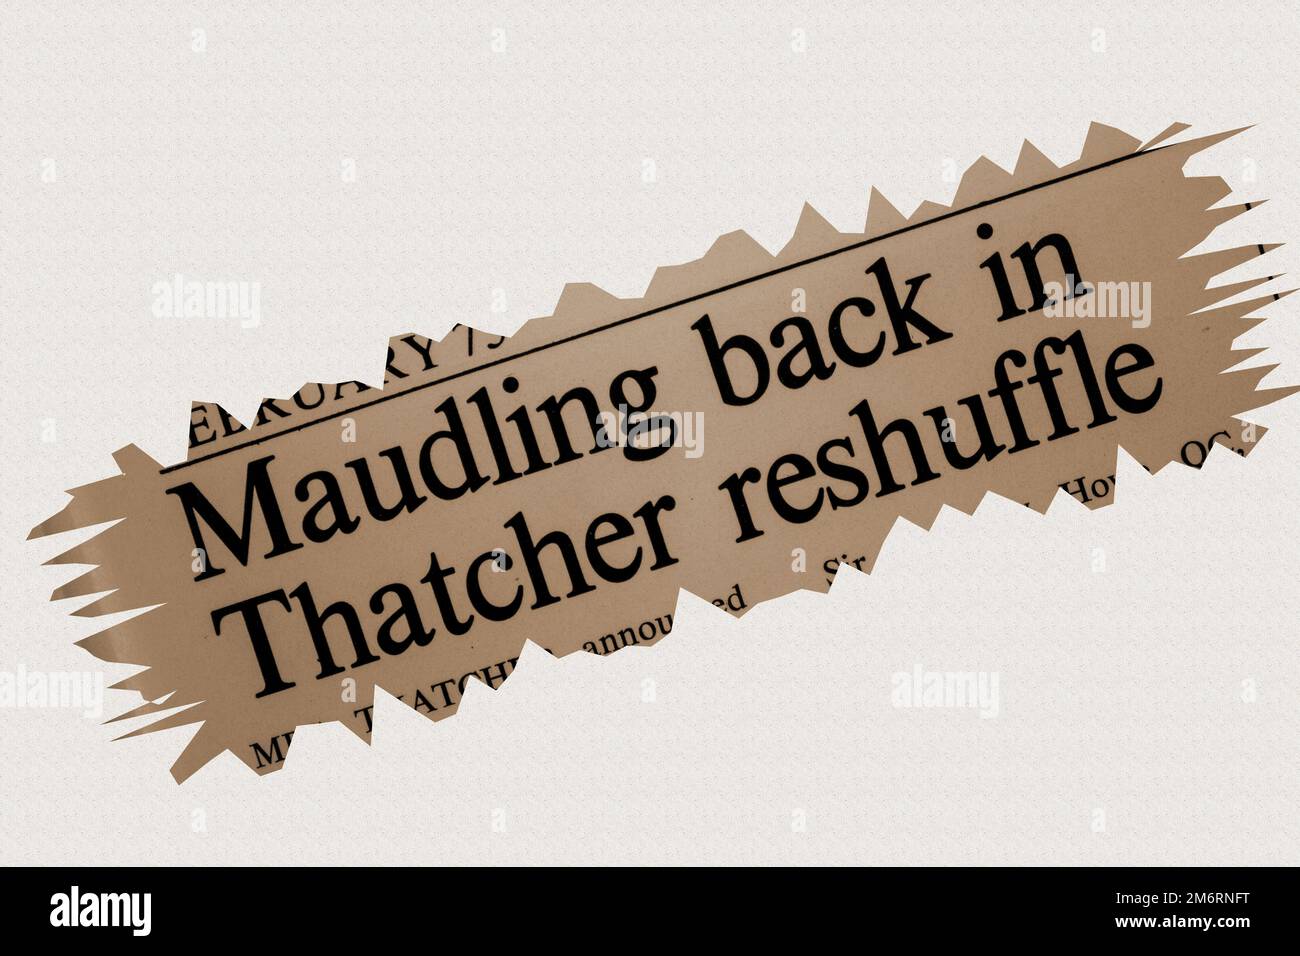 Maudling back in Thatcher reshuffle - news story from 1975 newspaper headline article title with overlay in sepia Stock Photo